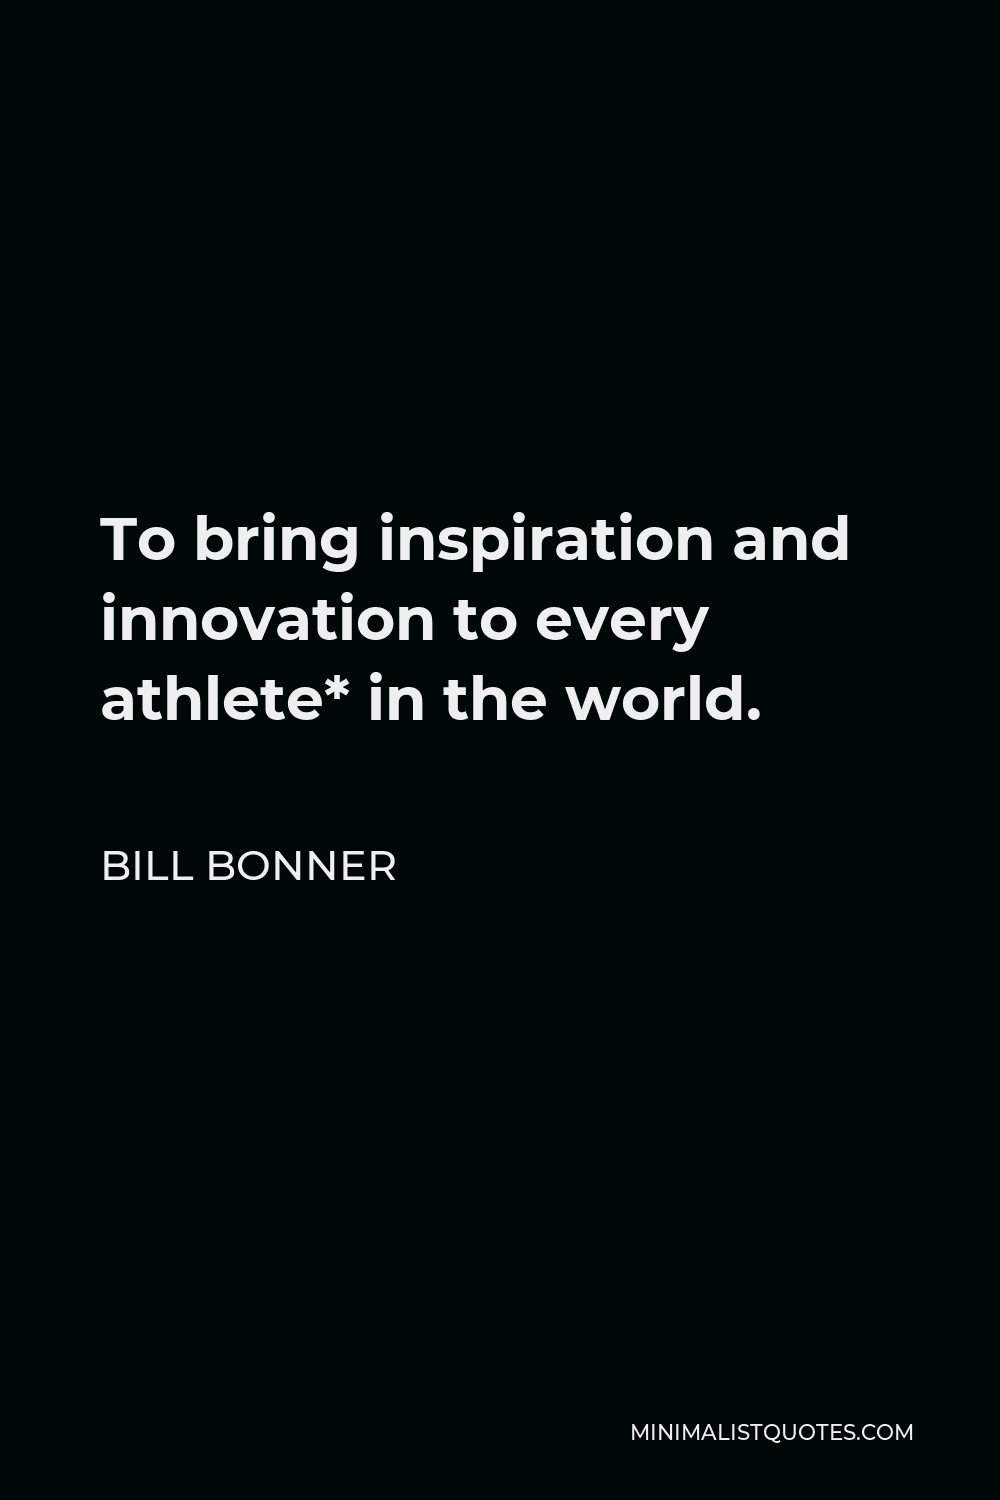 Bill Bonner Quote - To bring inspiration and innovation to every athlete* in the world.